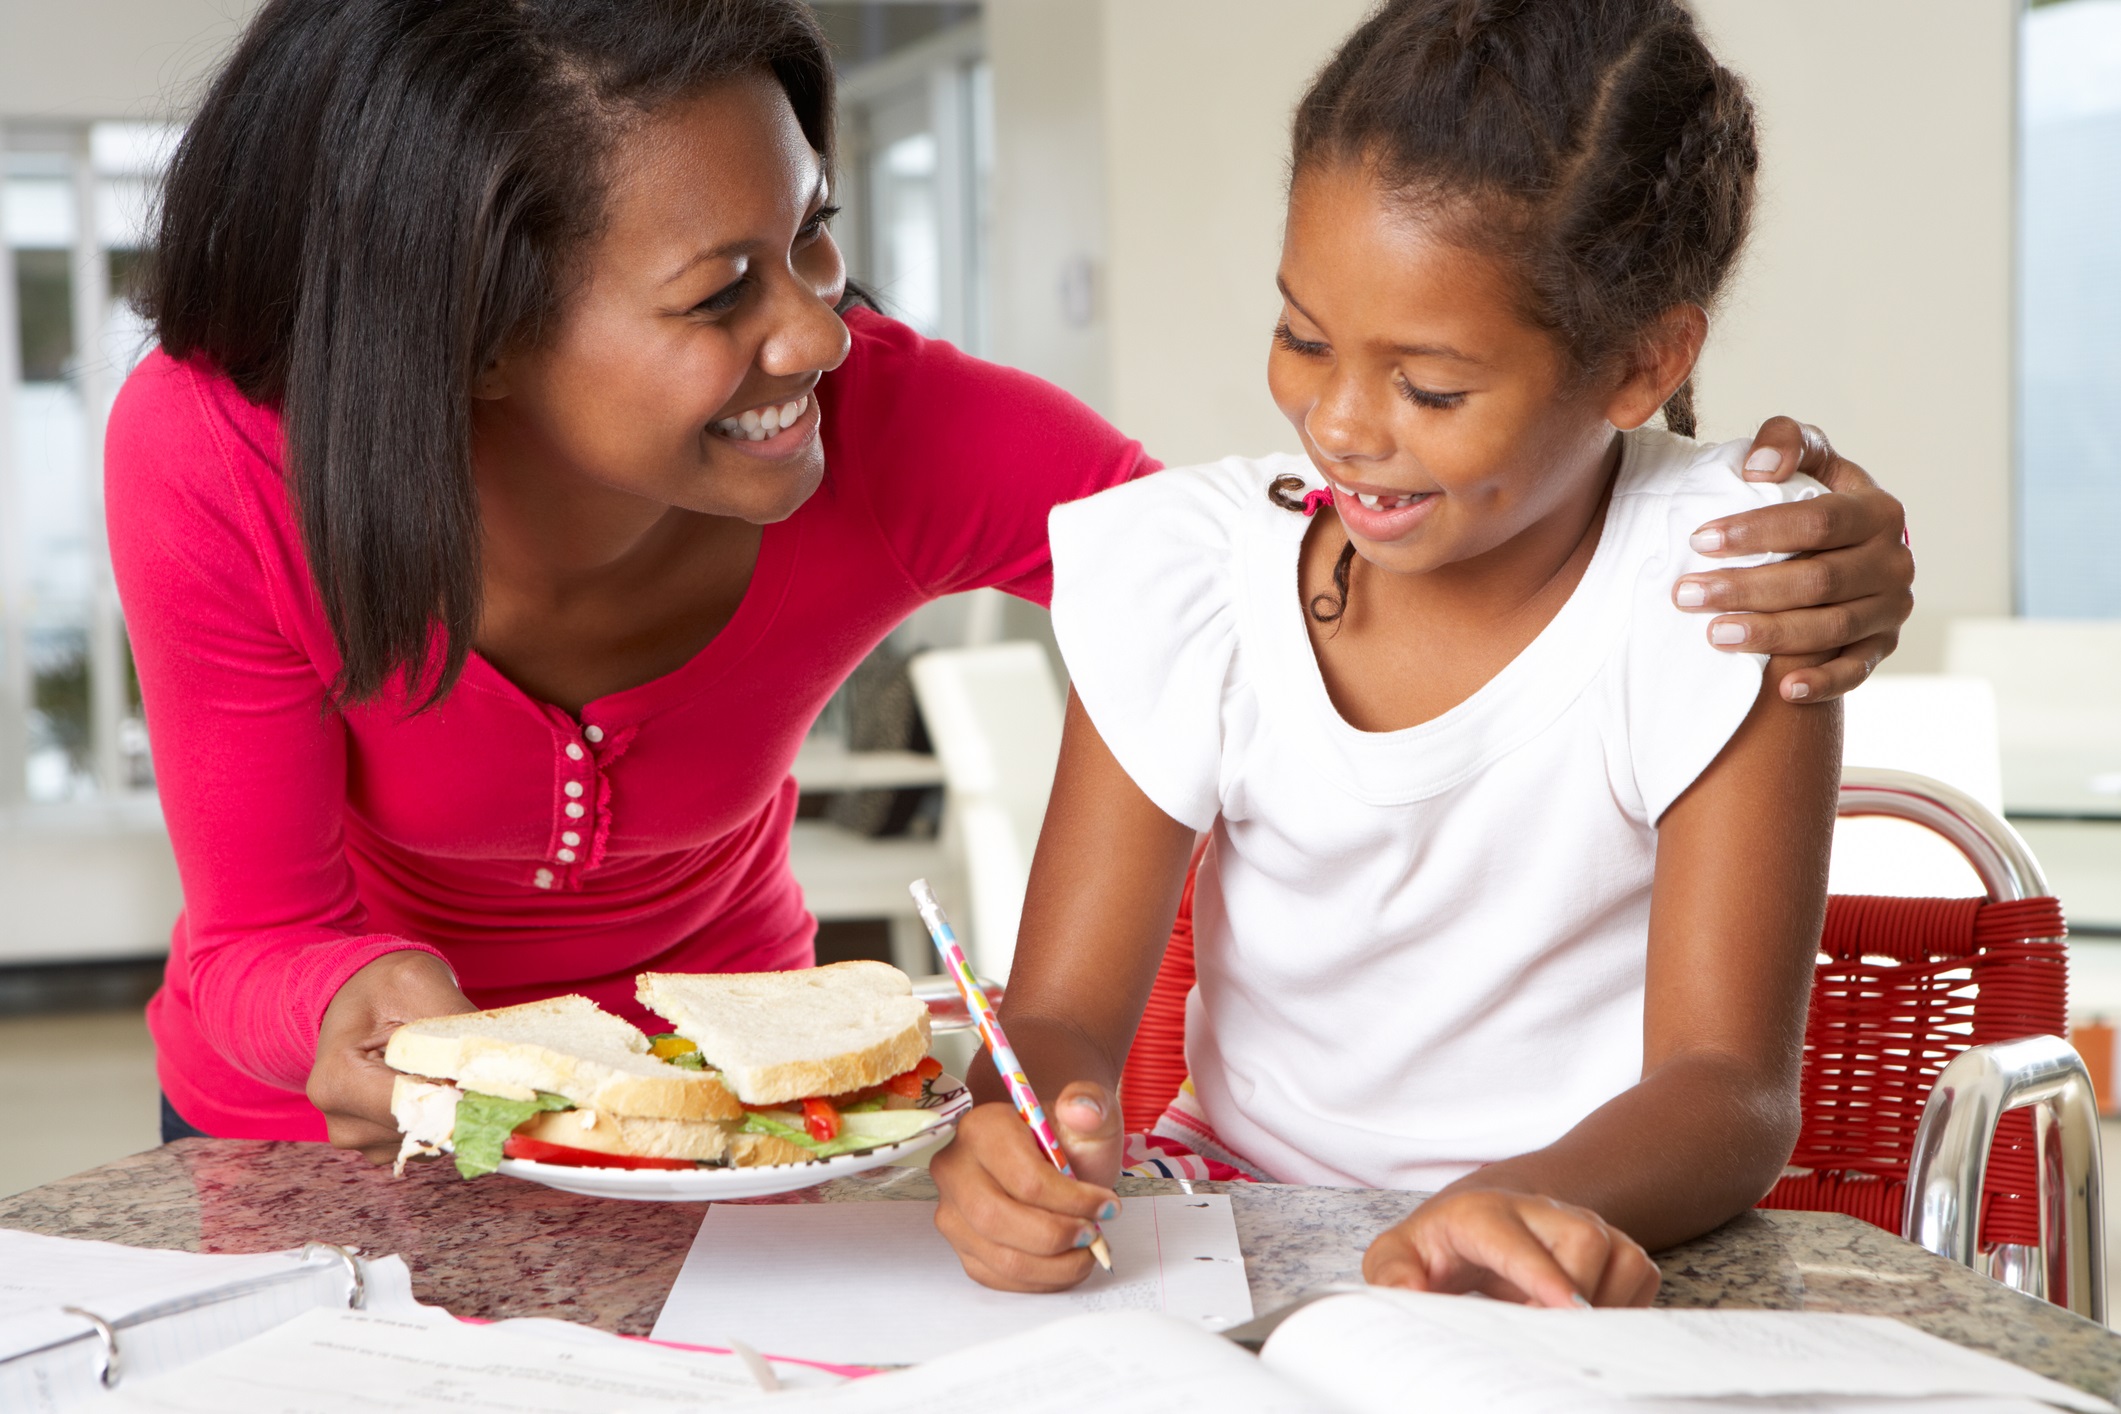 mother and daughter with afterschool snack-Monkeybusiness Images